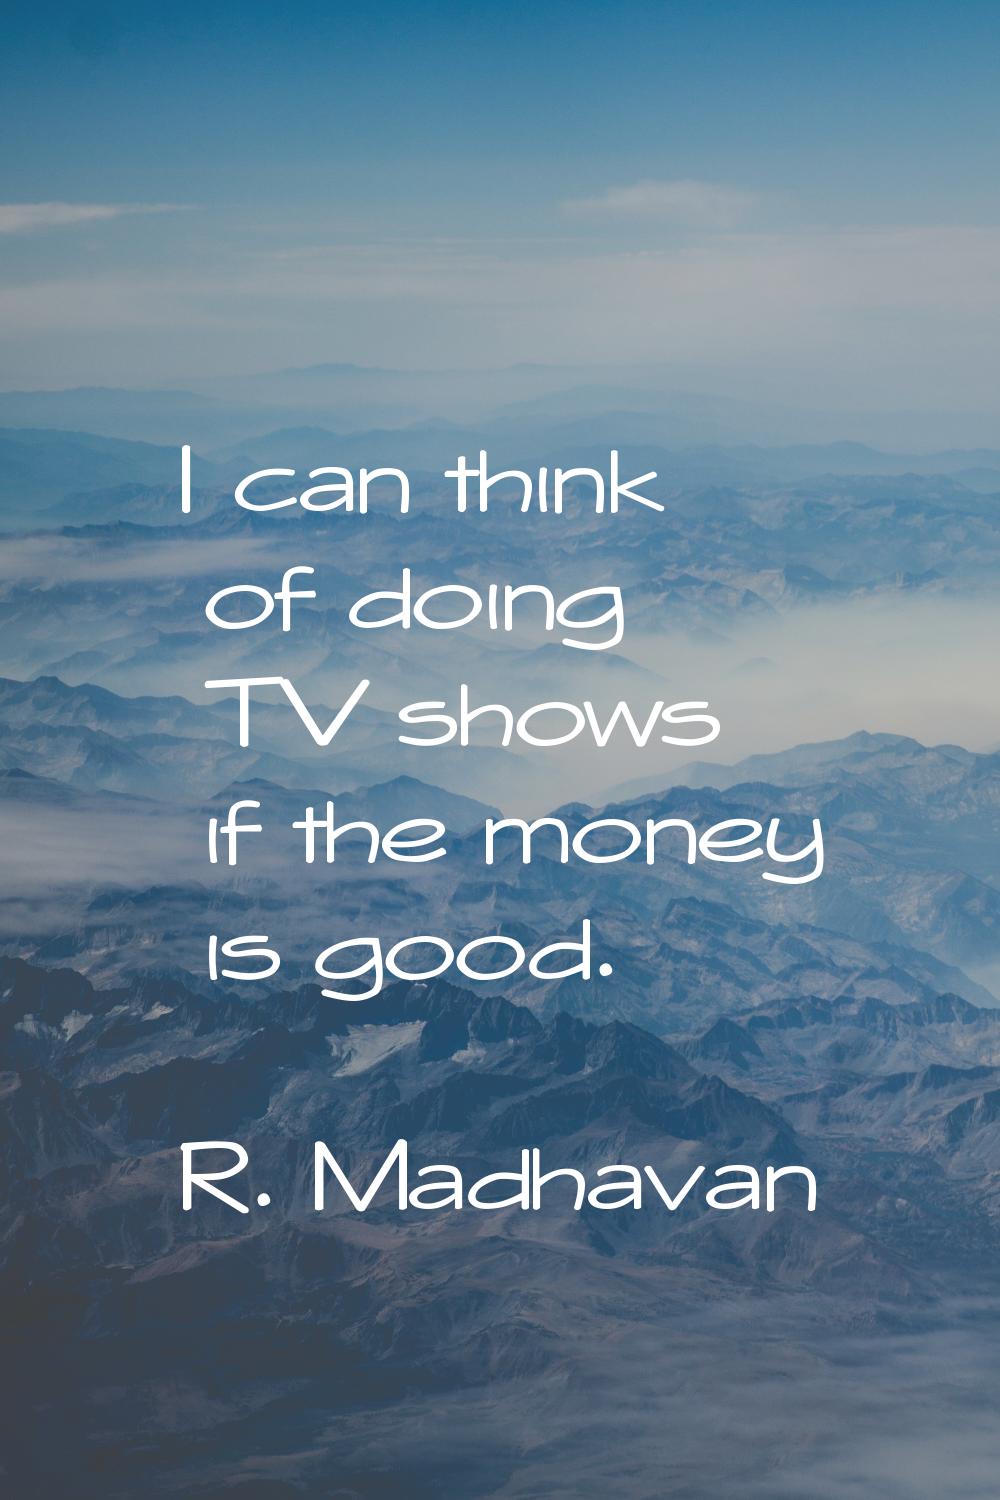 I can think of doing TV shows if the money is good.